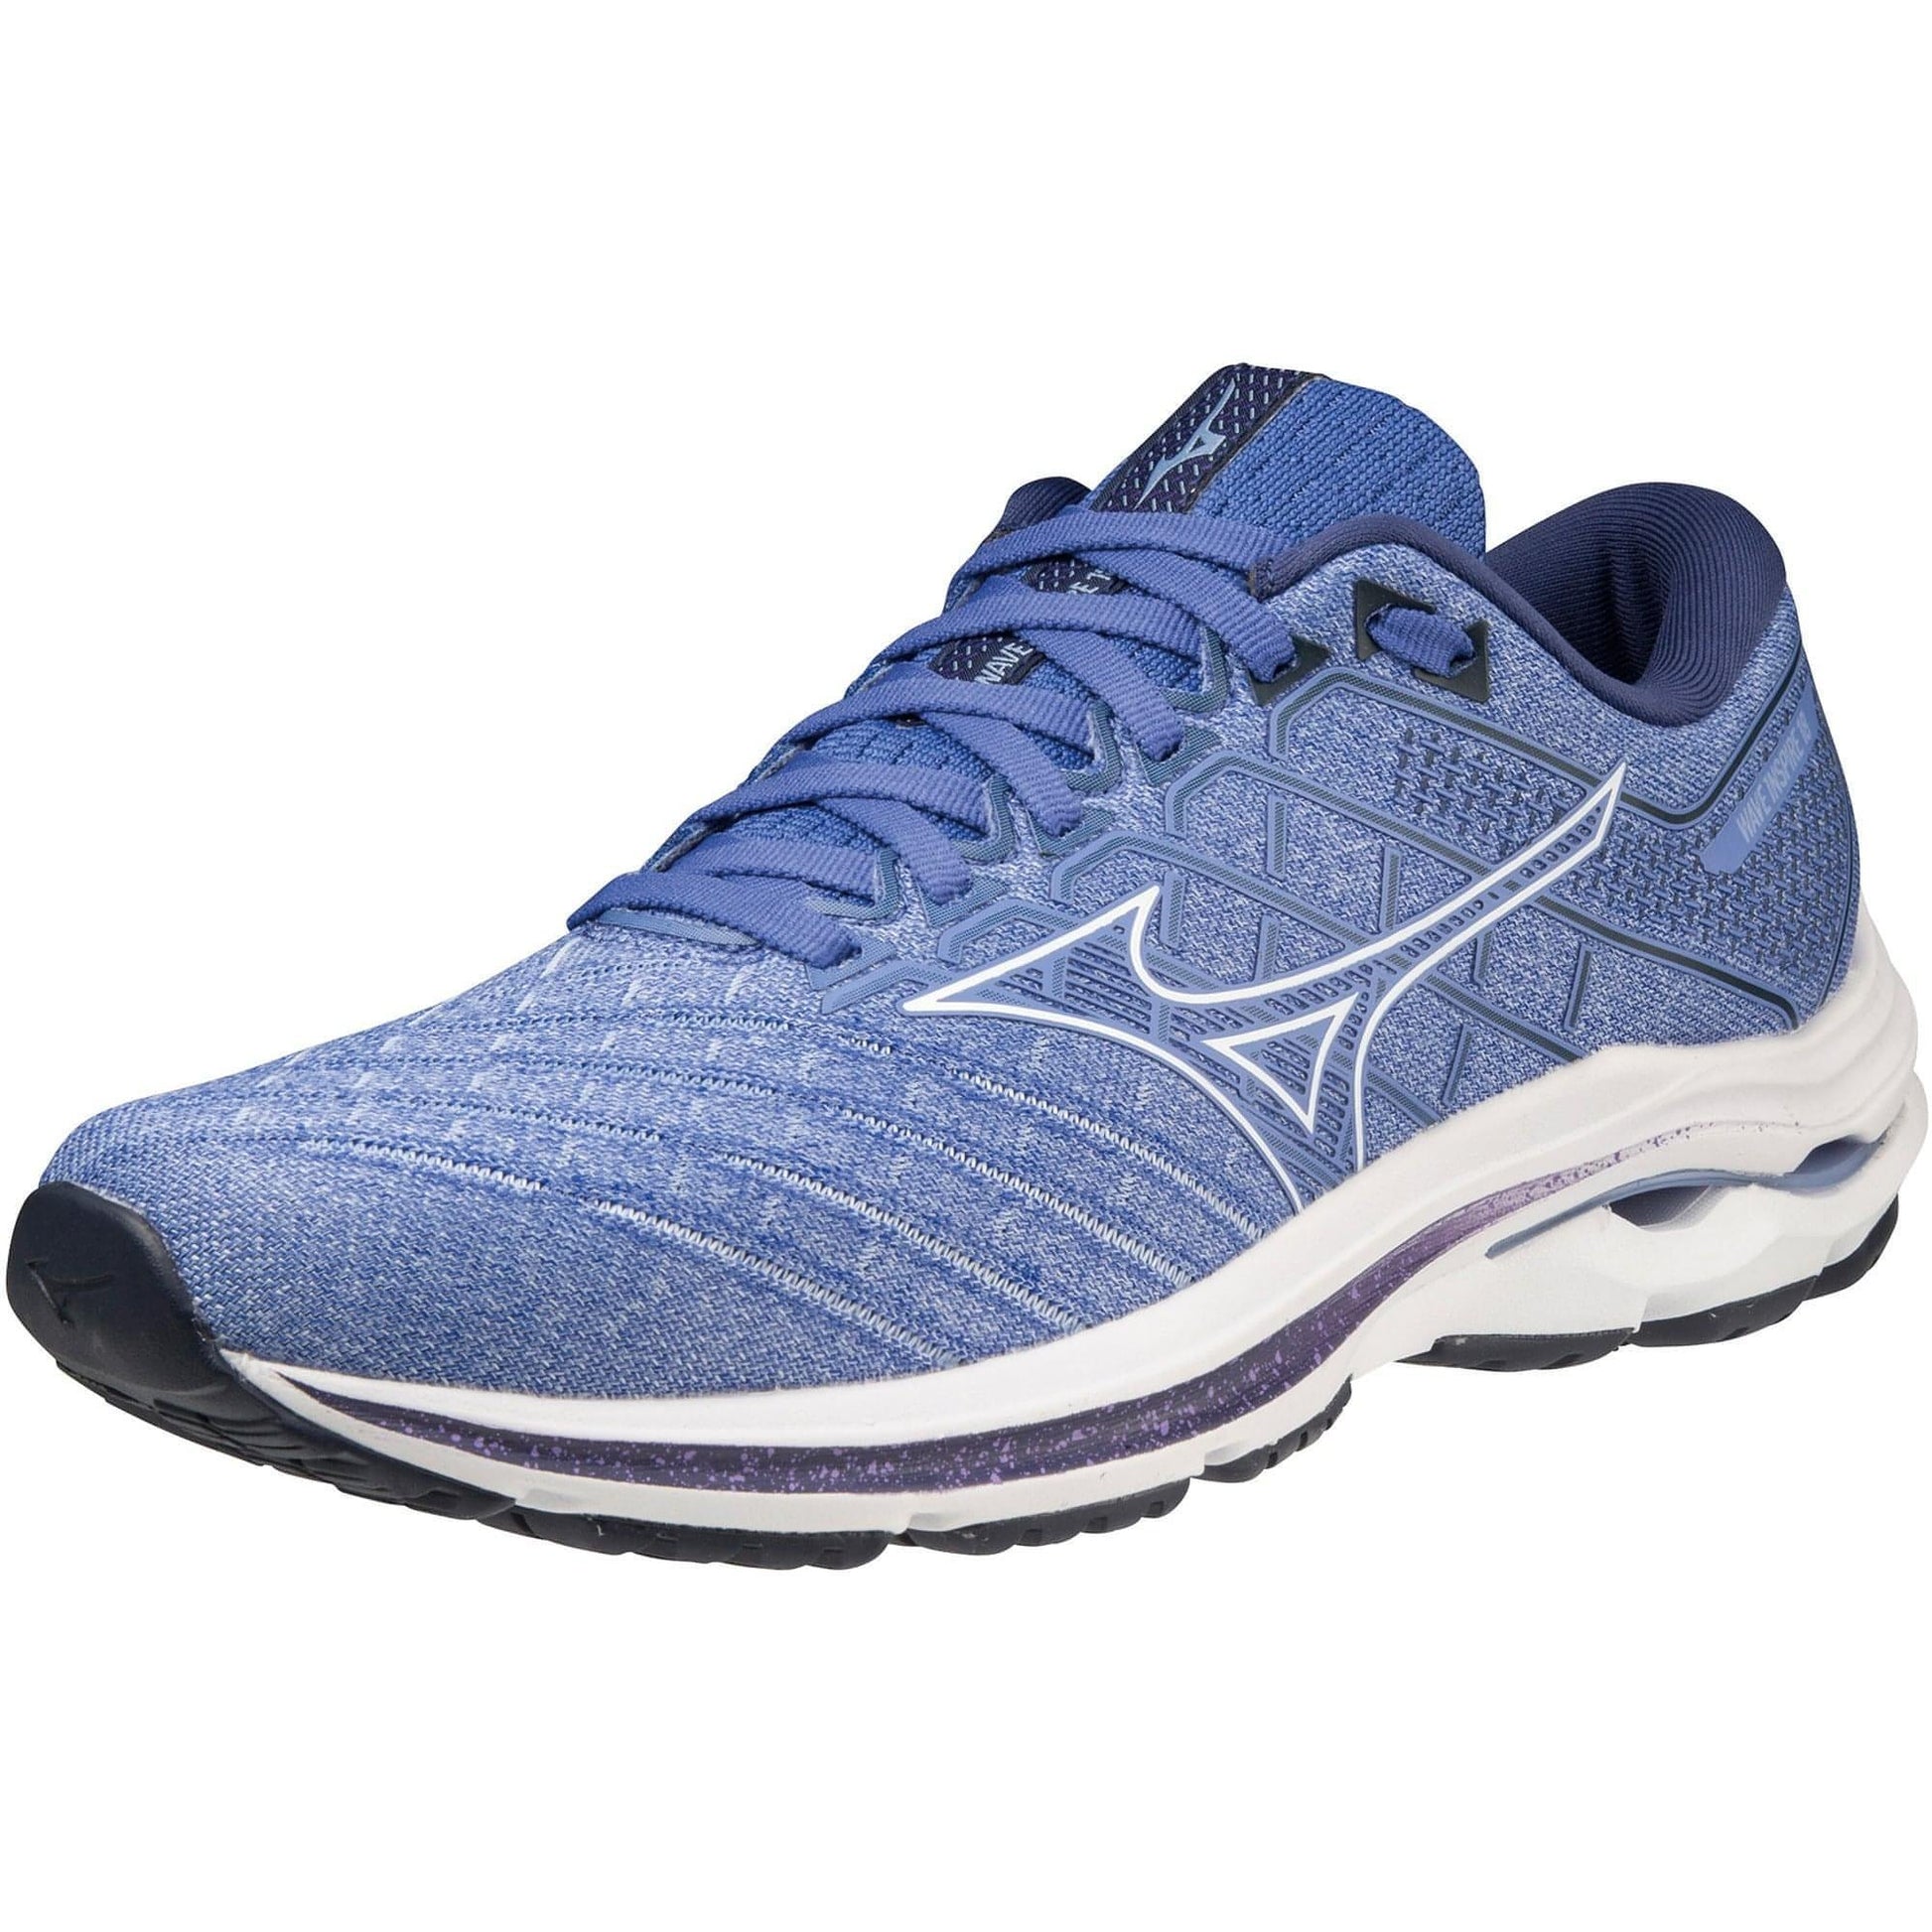 Mizuno Wave Inspire J1Gd2244 Front - Front View